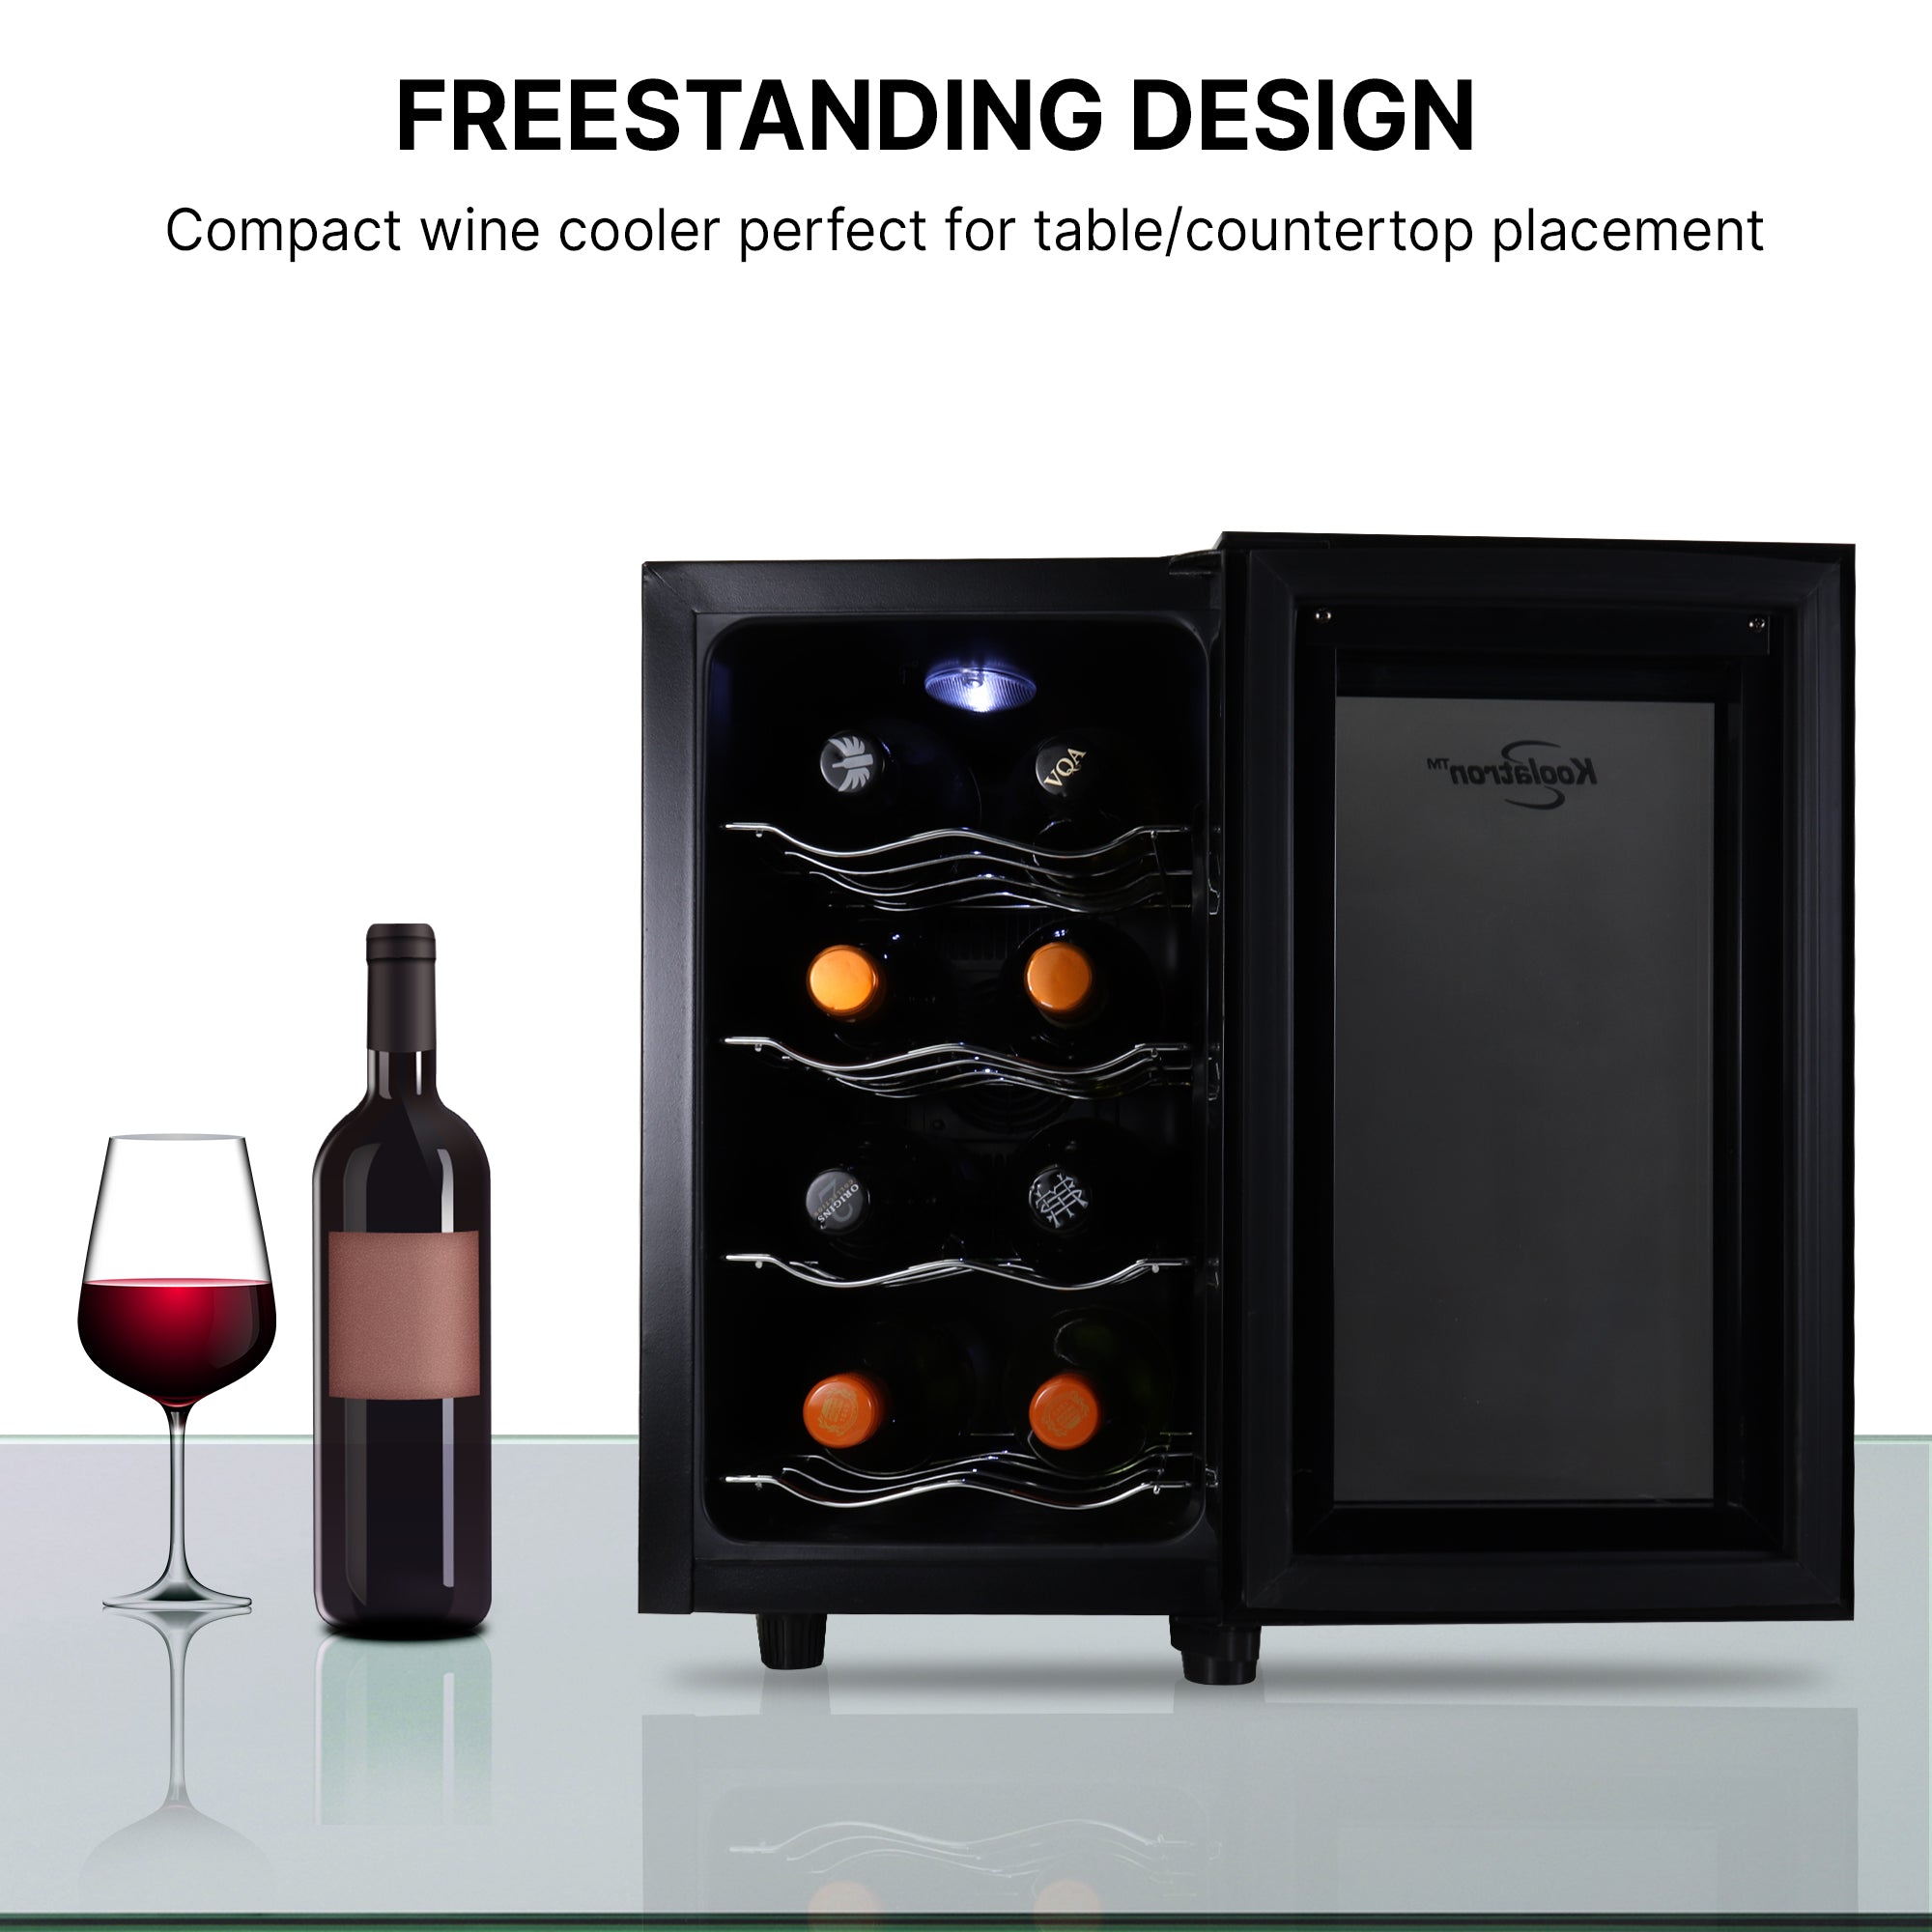 Koolatron 8 bottle countertop wine cooler, open, with a bottle and glass of red wine to the left; Text above reads "Freestanding design: Compact wine cooler perfect for floor placement"